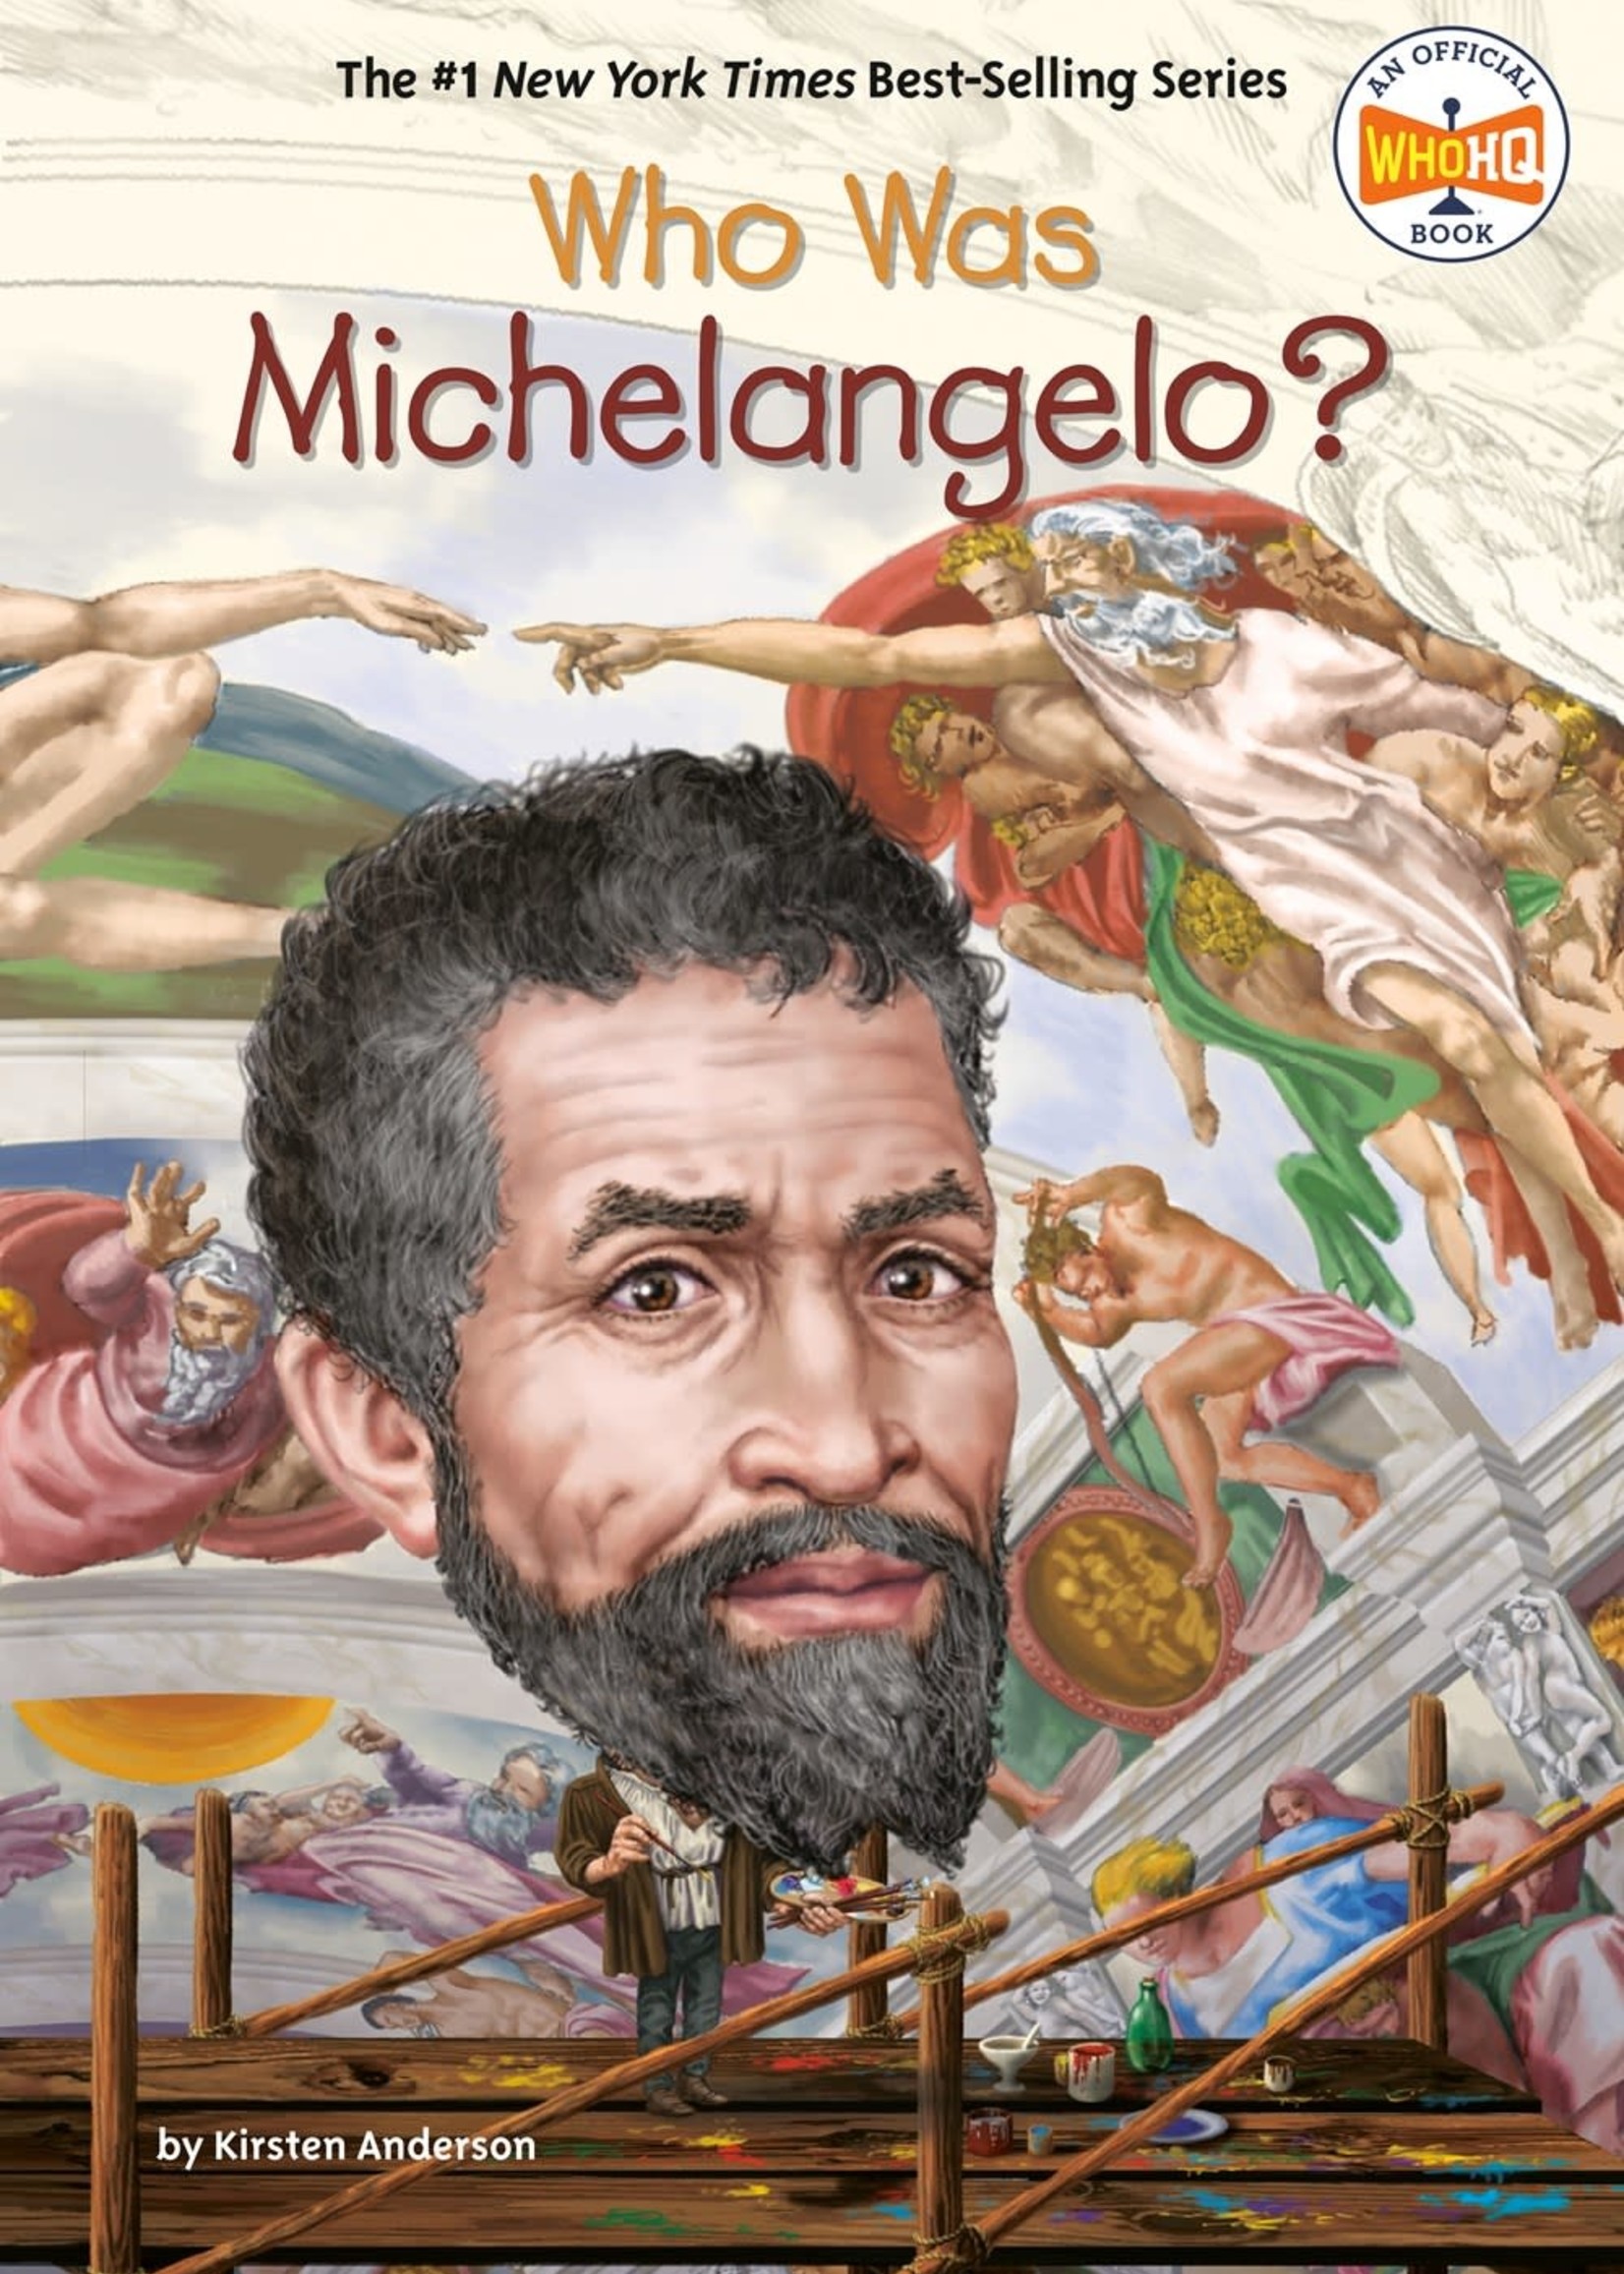 Who Was Micheangelo?